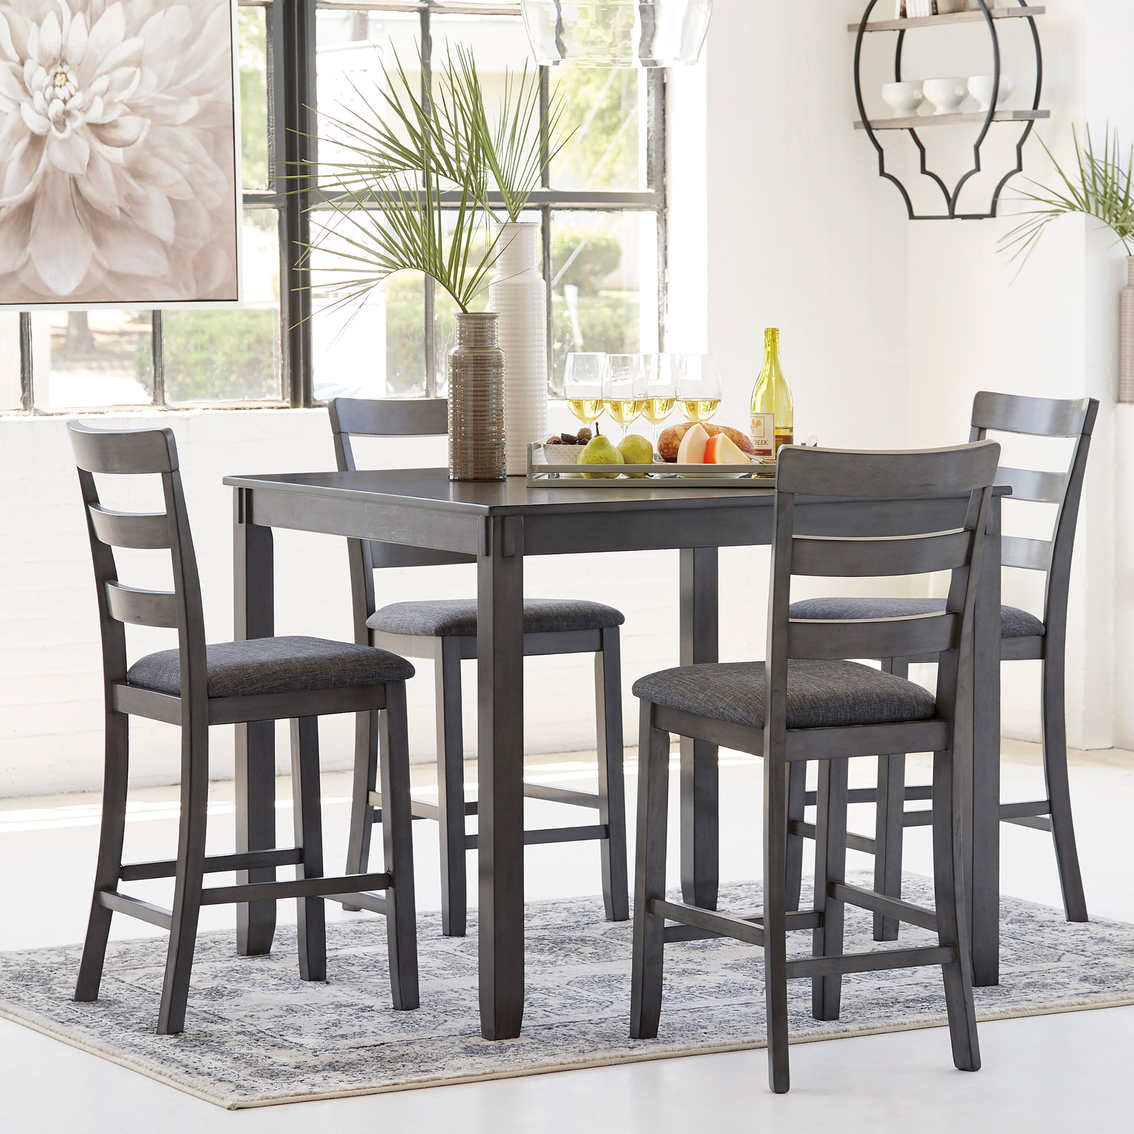 Signature Design by Ashley Bridson 5 pc. Square Counter Dining Set - Image 2 of 6